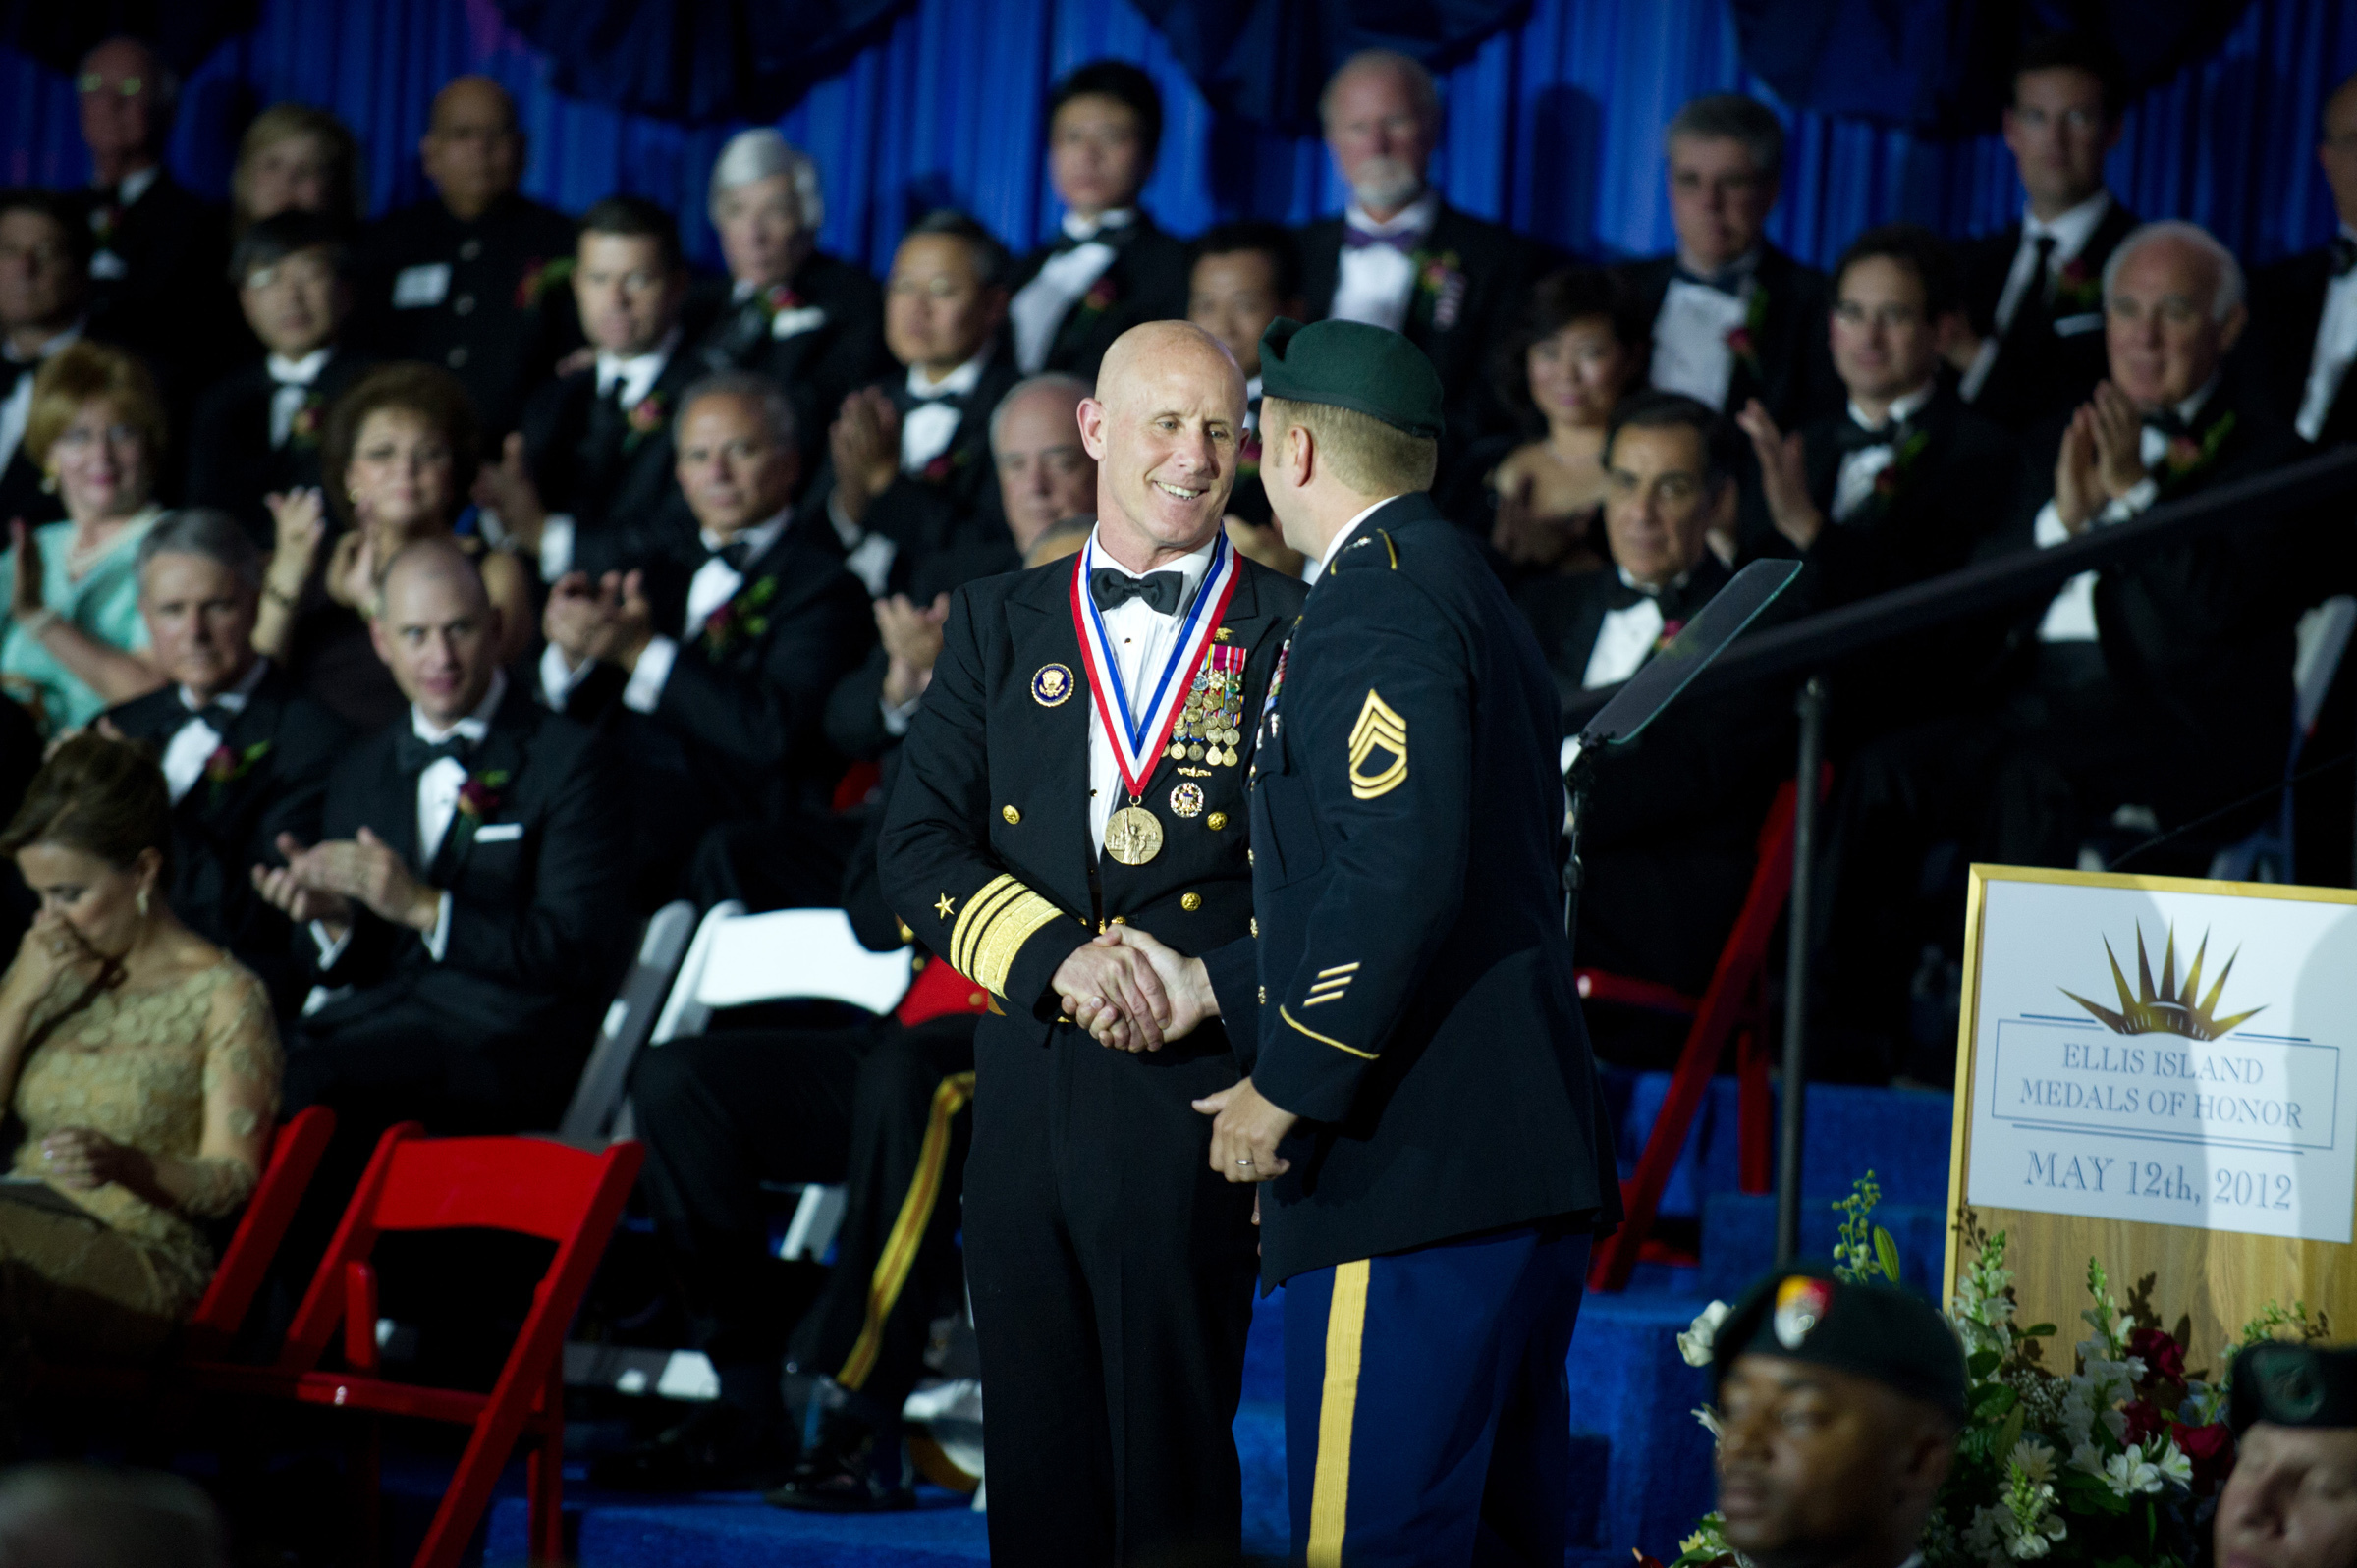 PHOTO: U.S. Navy Vice Adm. Robert S. Harward receives the Ellis Island Medal of Honor Award from a U.S. Army Special Forces soldier during a ceremony, May 12, 2012, at Ellis Island in New York.